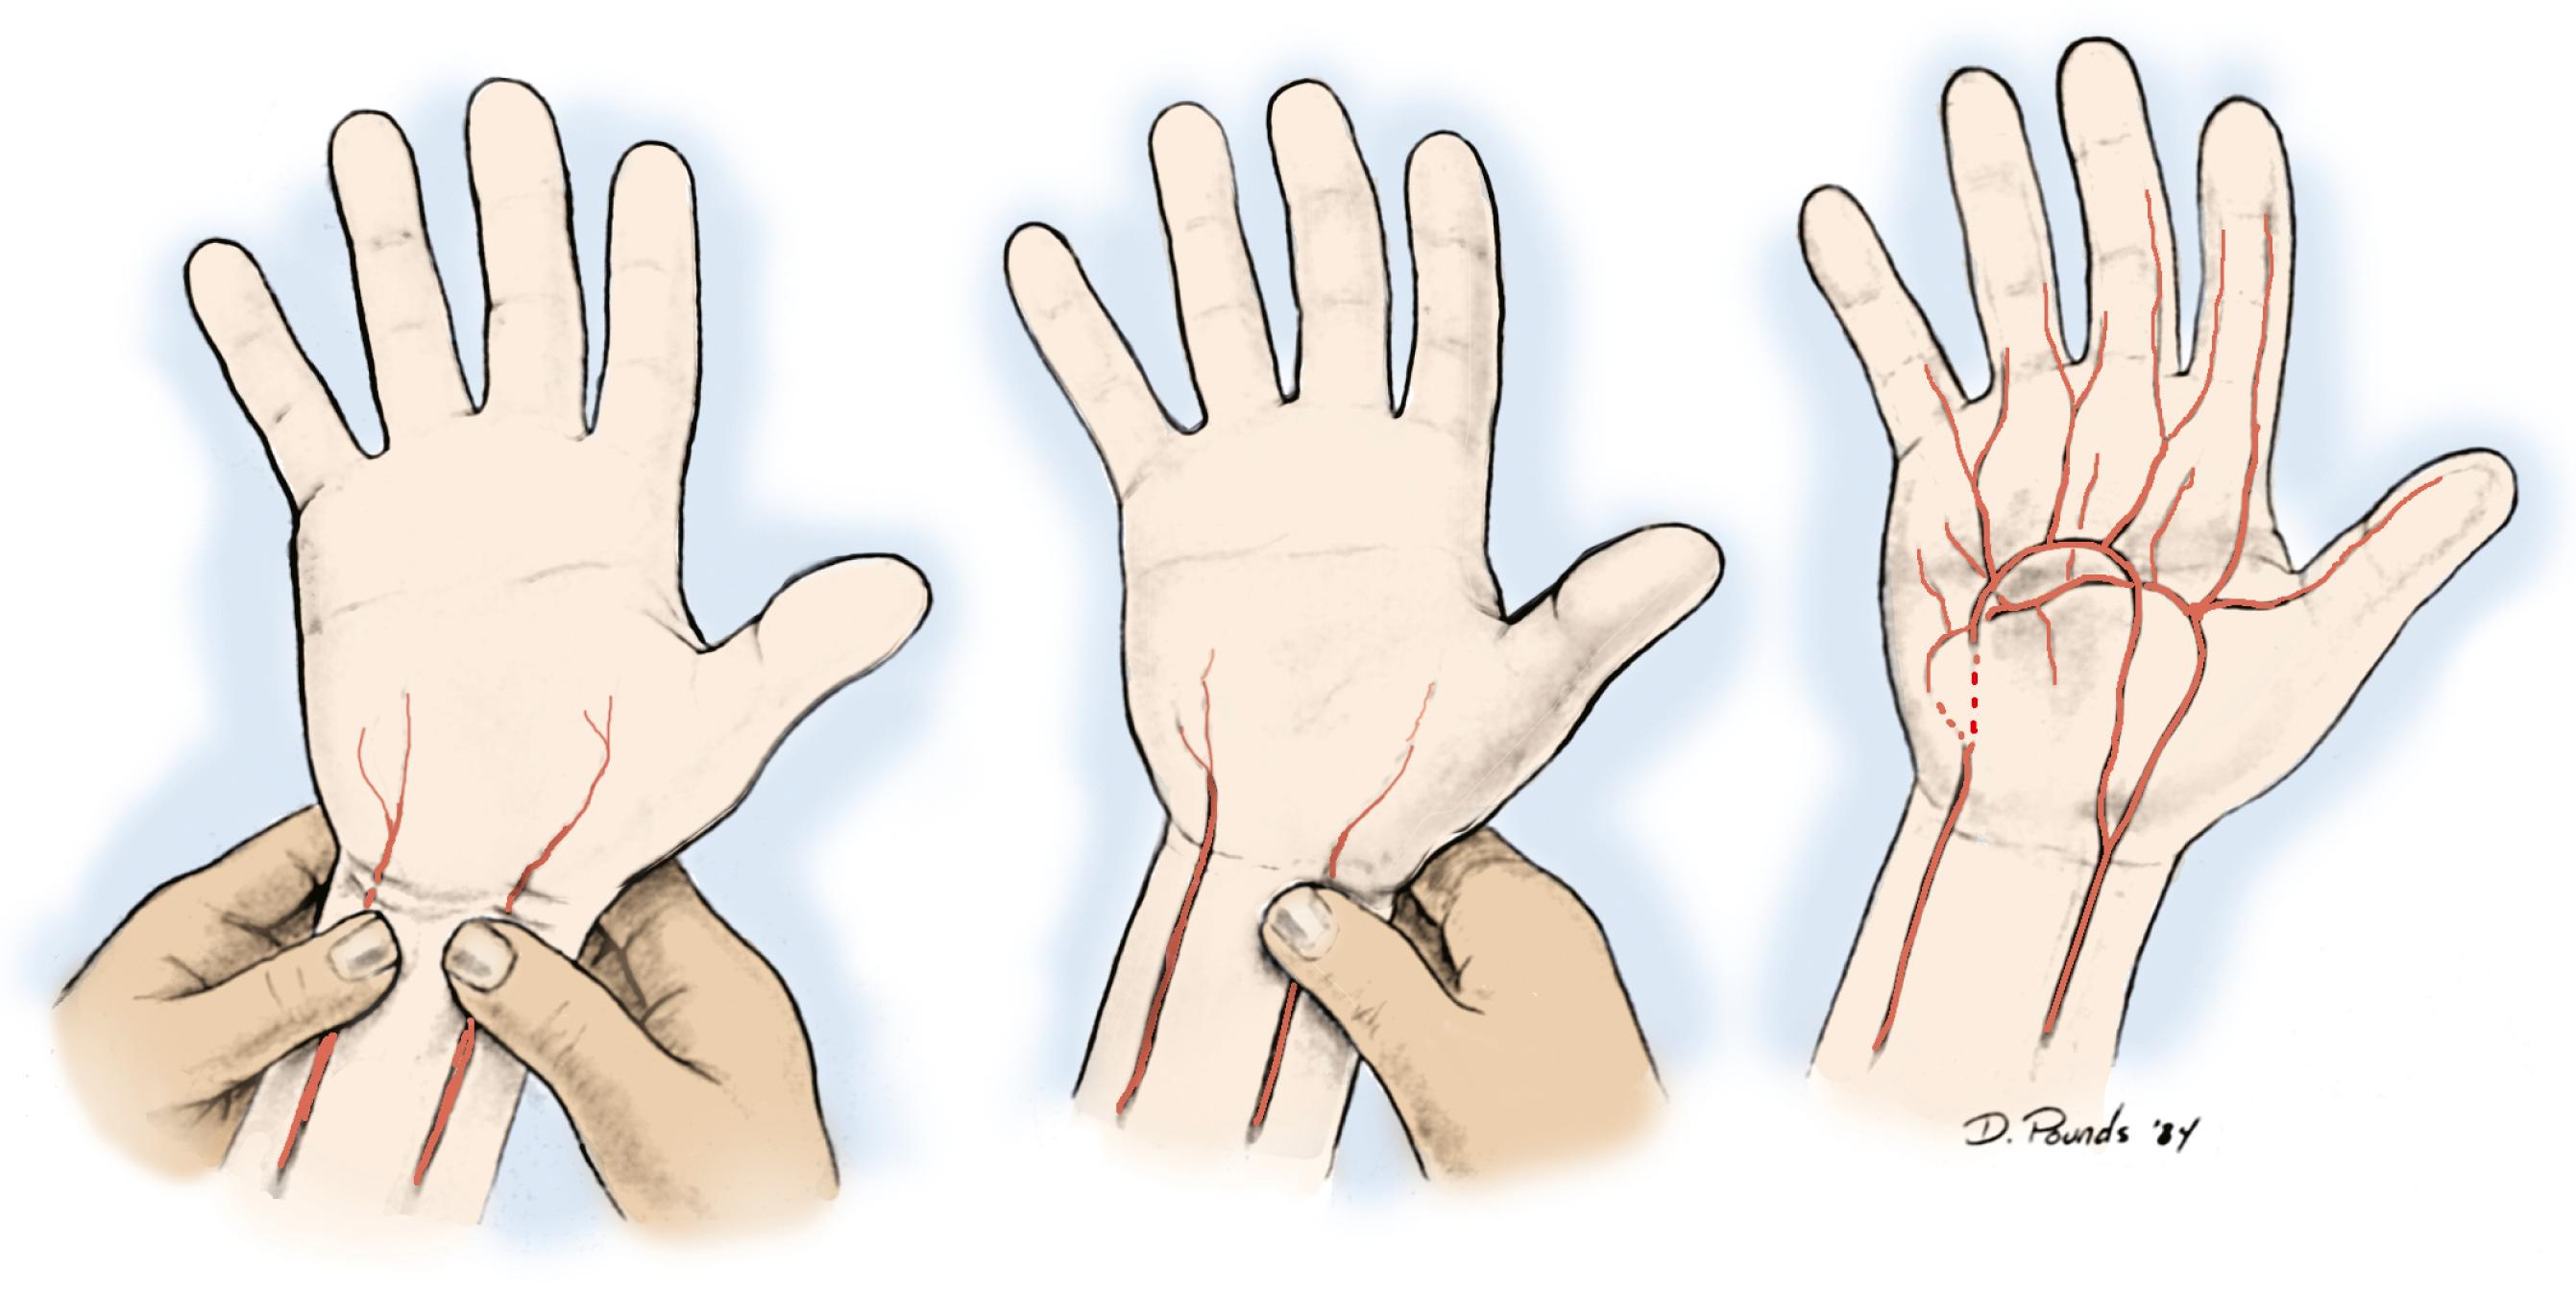 Fig. 60.2, The Allen test is represented schematically. Blood is exsanguinated from the hand, and both the radial and ulnar arteries are compressed (left) . After release of the ulnar artery (middle) , no blood flows through the occluded artery, and the palm remains pale. With release of the radial artery (right) , the entire hand will fill rapidly through the radial artery if the arch is complete. The order of the testing maneuvers can be reversed to evaluate the radial artery in a similar fashion. The test is best described as demonstrating flow or no flow through a specific artery.